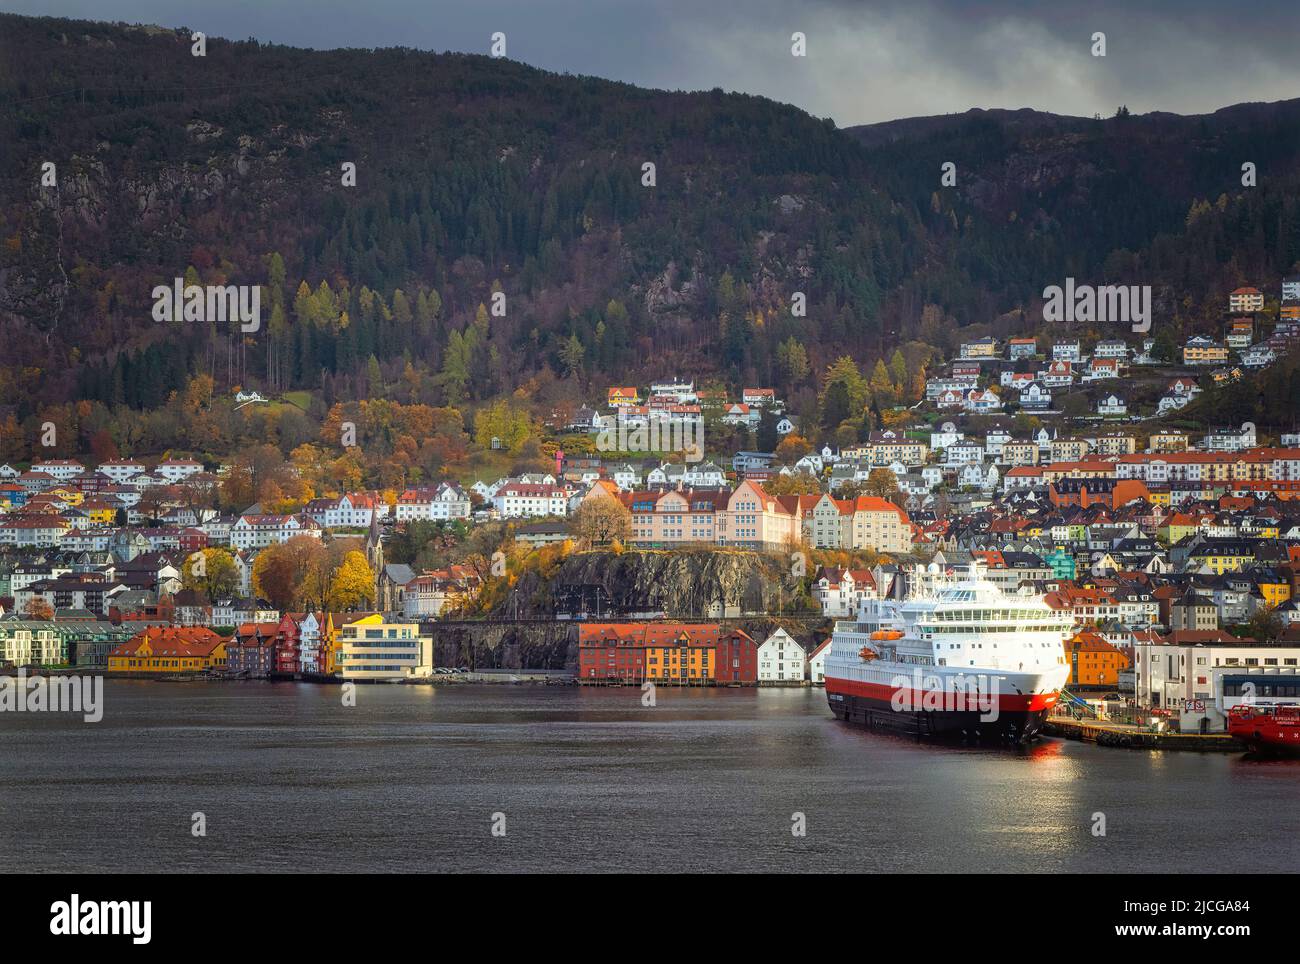 The Hurtigruten cruise ship MS Otto Sverdrup (formerly MS Finnmarken) docked in the colourful city of Bergen in Norway. Stock Photo